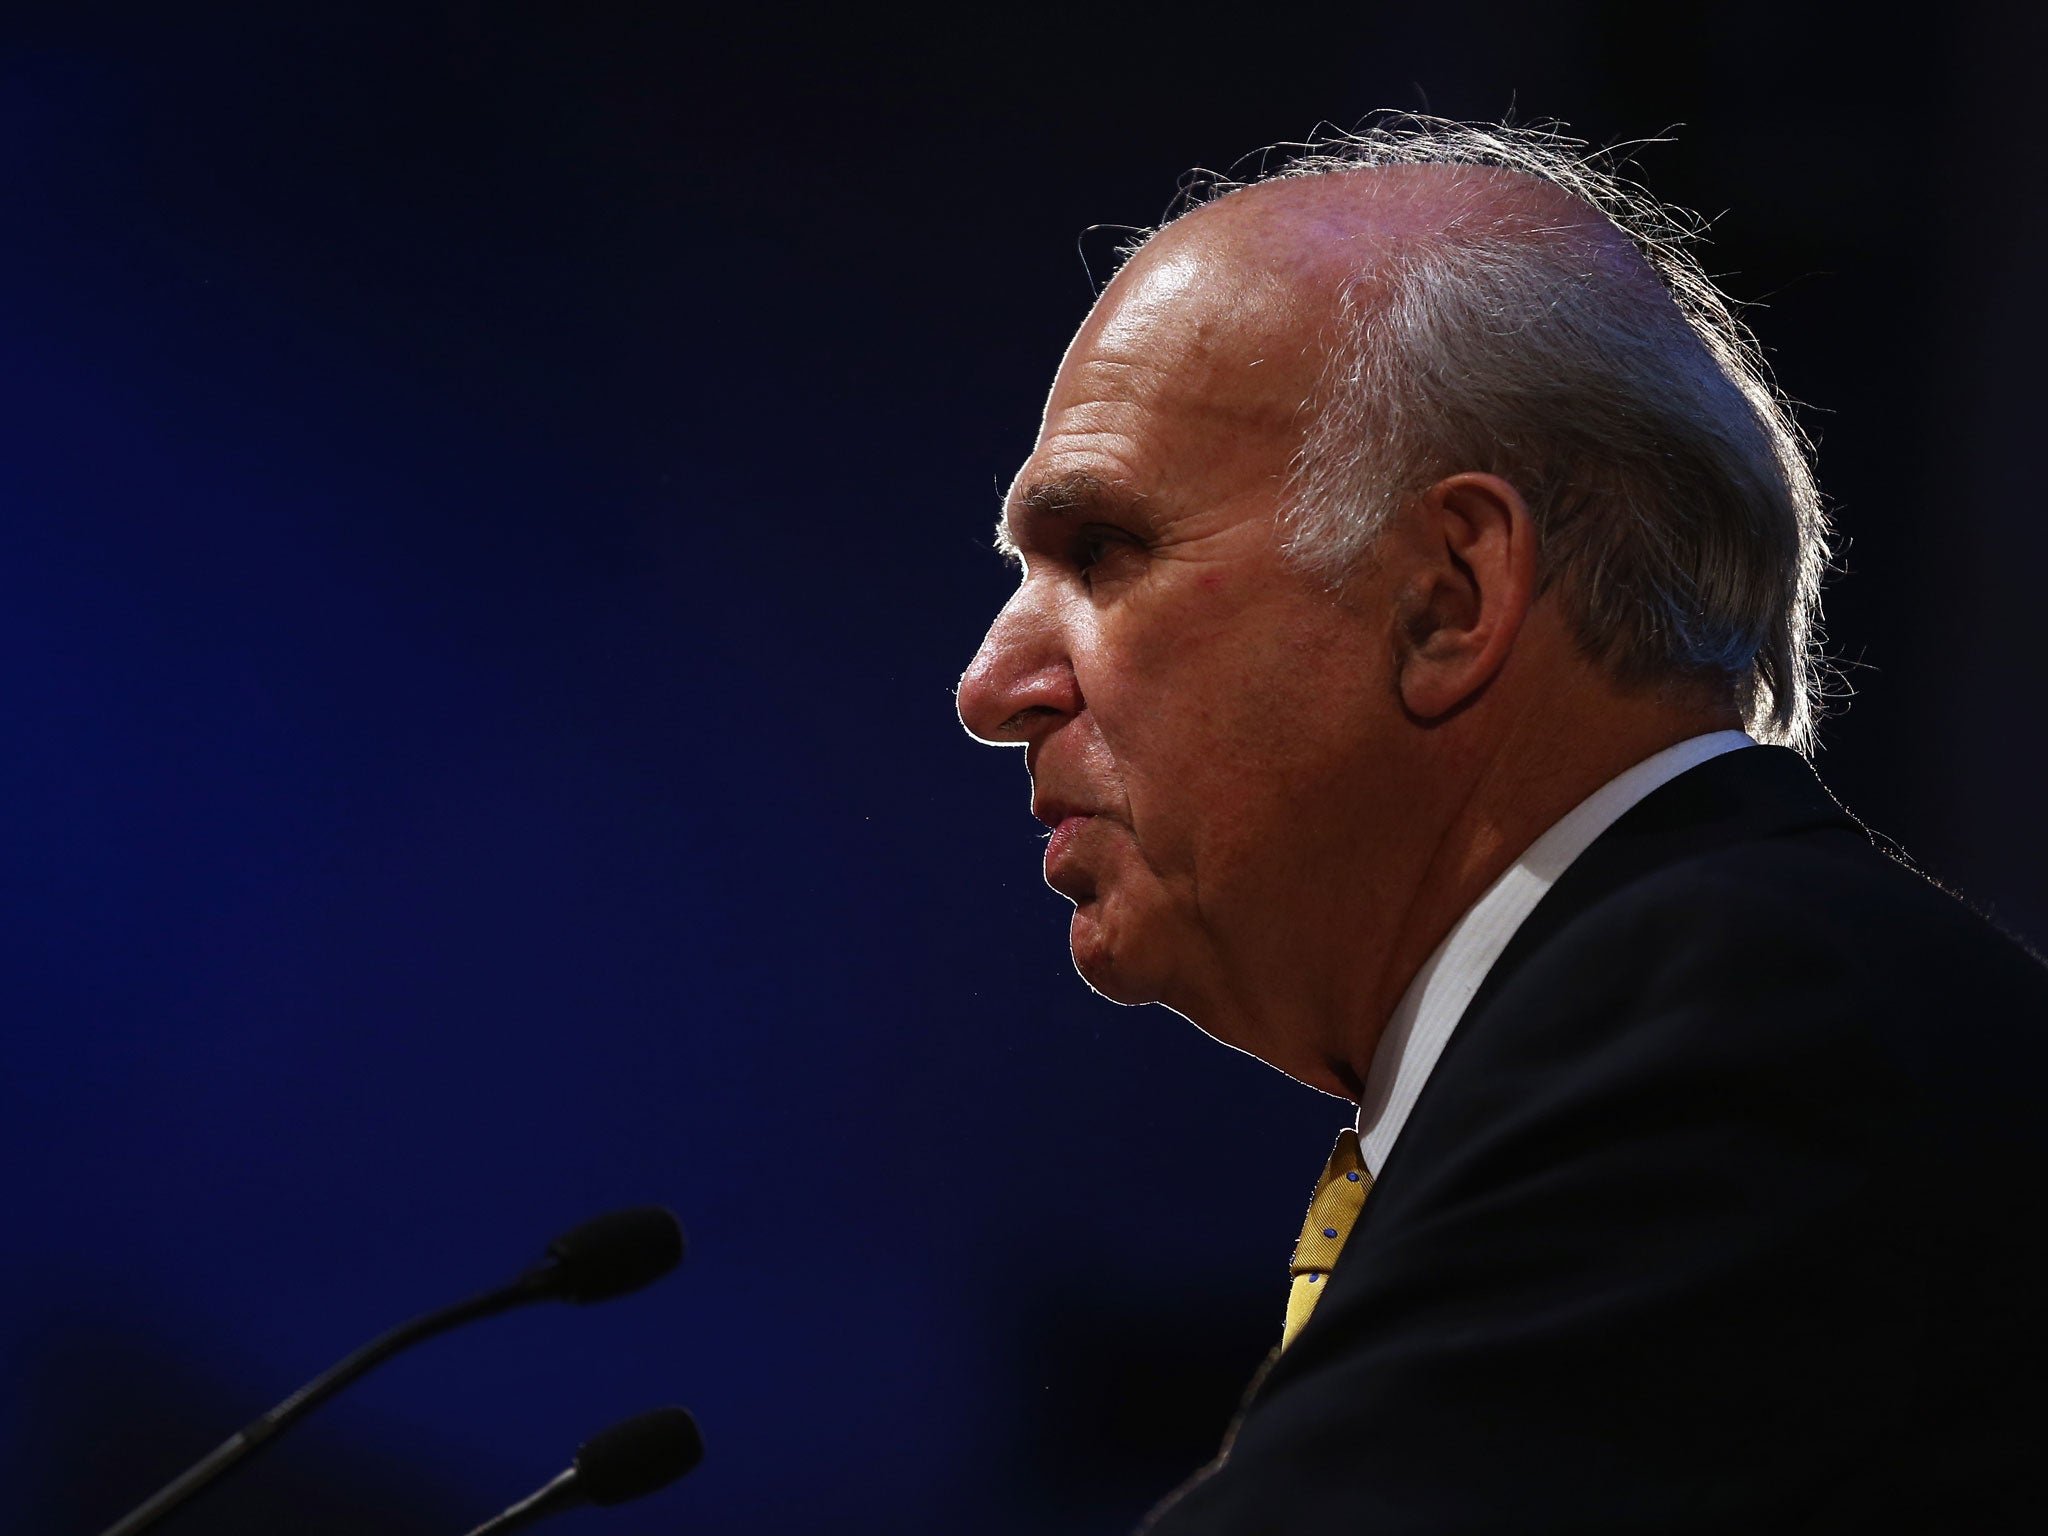 Vince Cable: 'There are different ways of finishing the job. Not all require the pace and scale of cuts set out by the Chancellor'